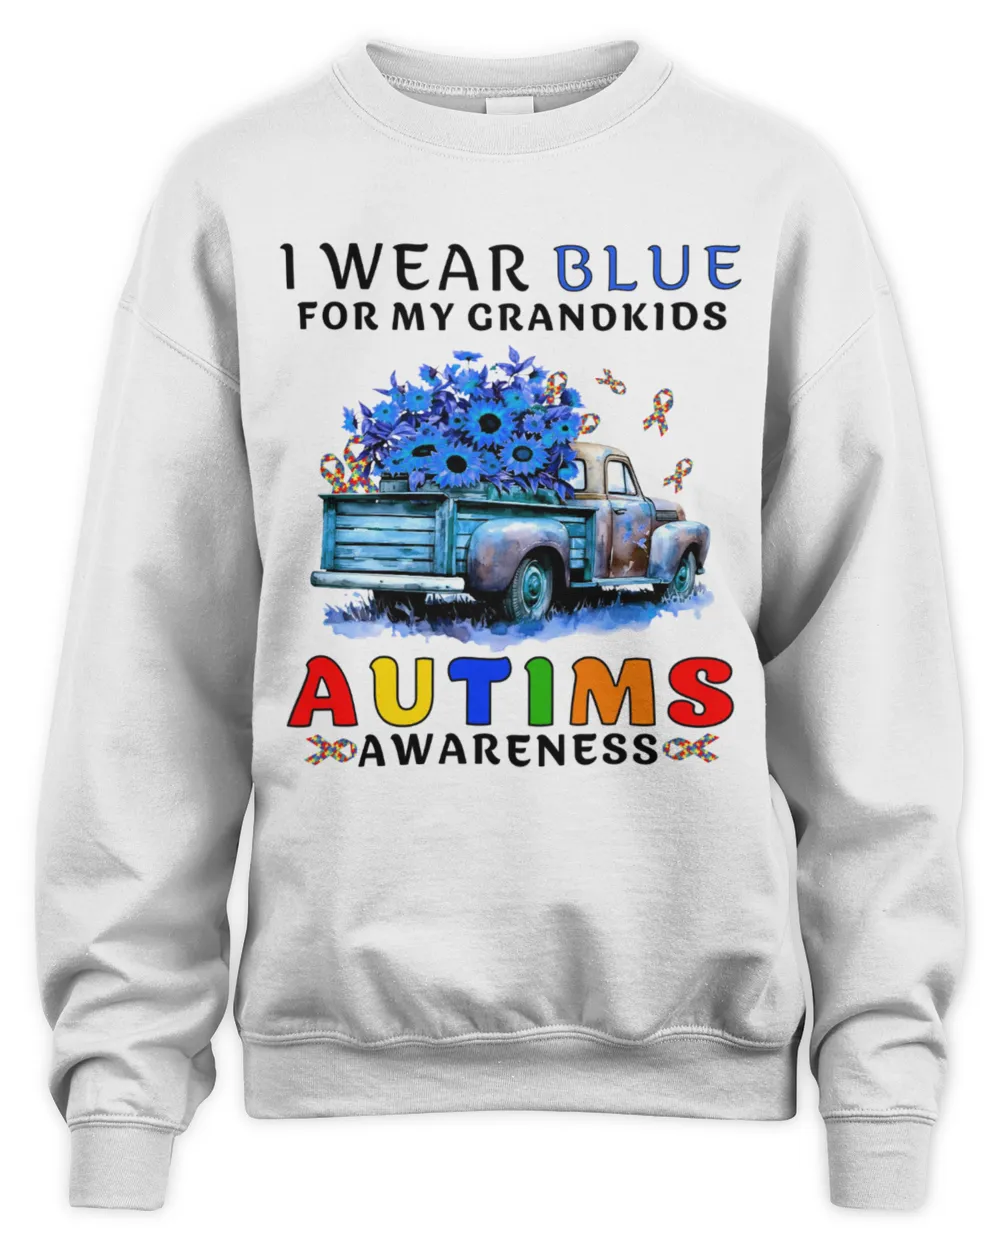 I wear blue for my grandkids autism awareness | Grandma shirt, Nana shirt, Granny Shirt, Gramma Shirt, Mother Day Gift, Grandma Birthday Gift